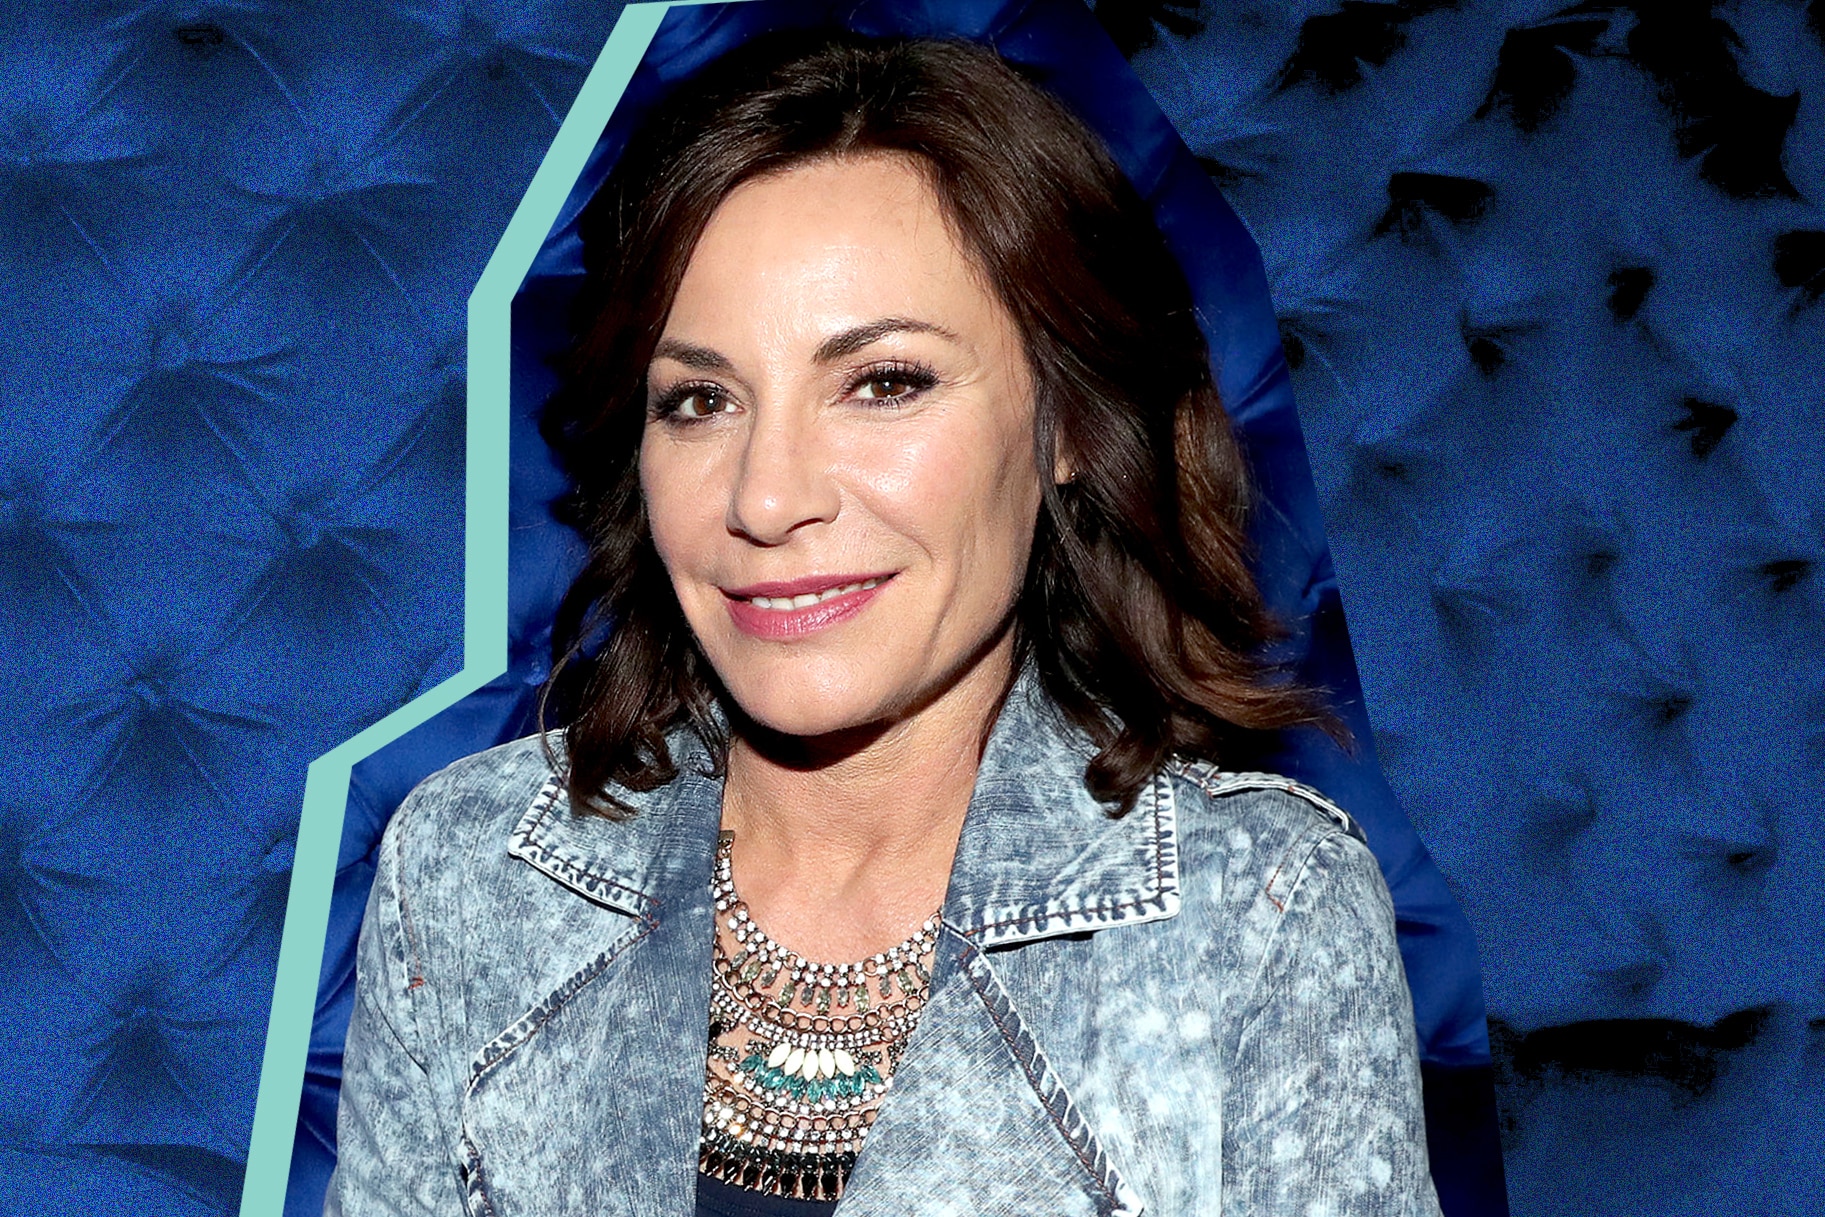 Topless luann de lesseps ‘Housewives’ gone